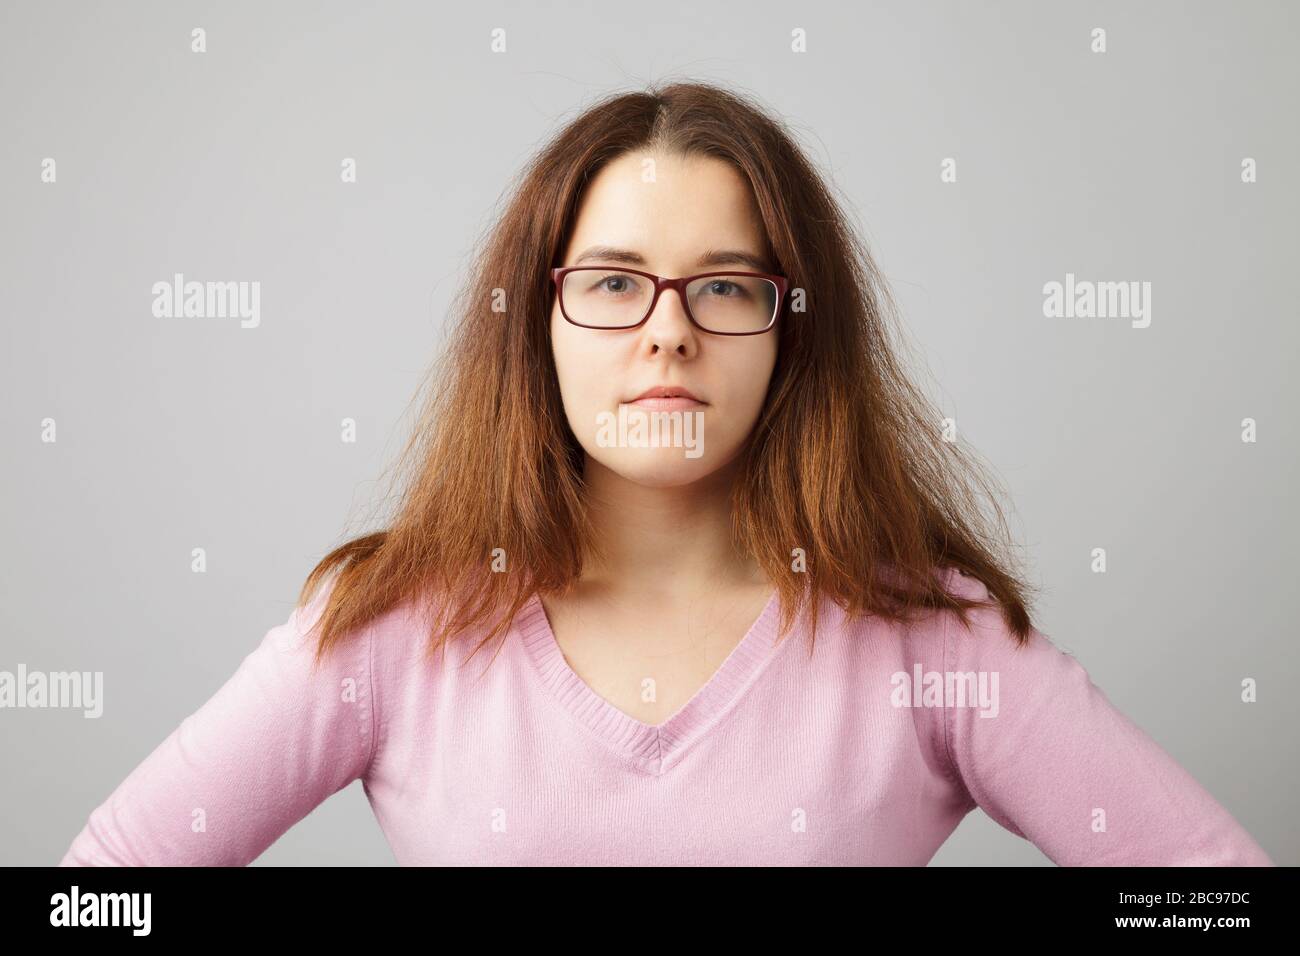 Young shaggy woman in eye glasses wearing pink cardigan. Head and shoulders portrait. Stock Photo